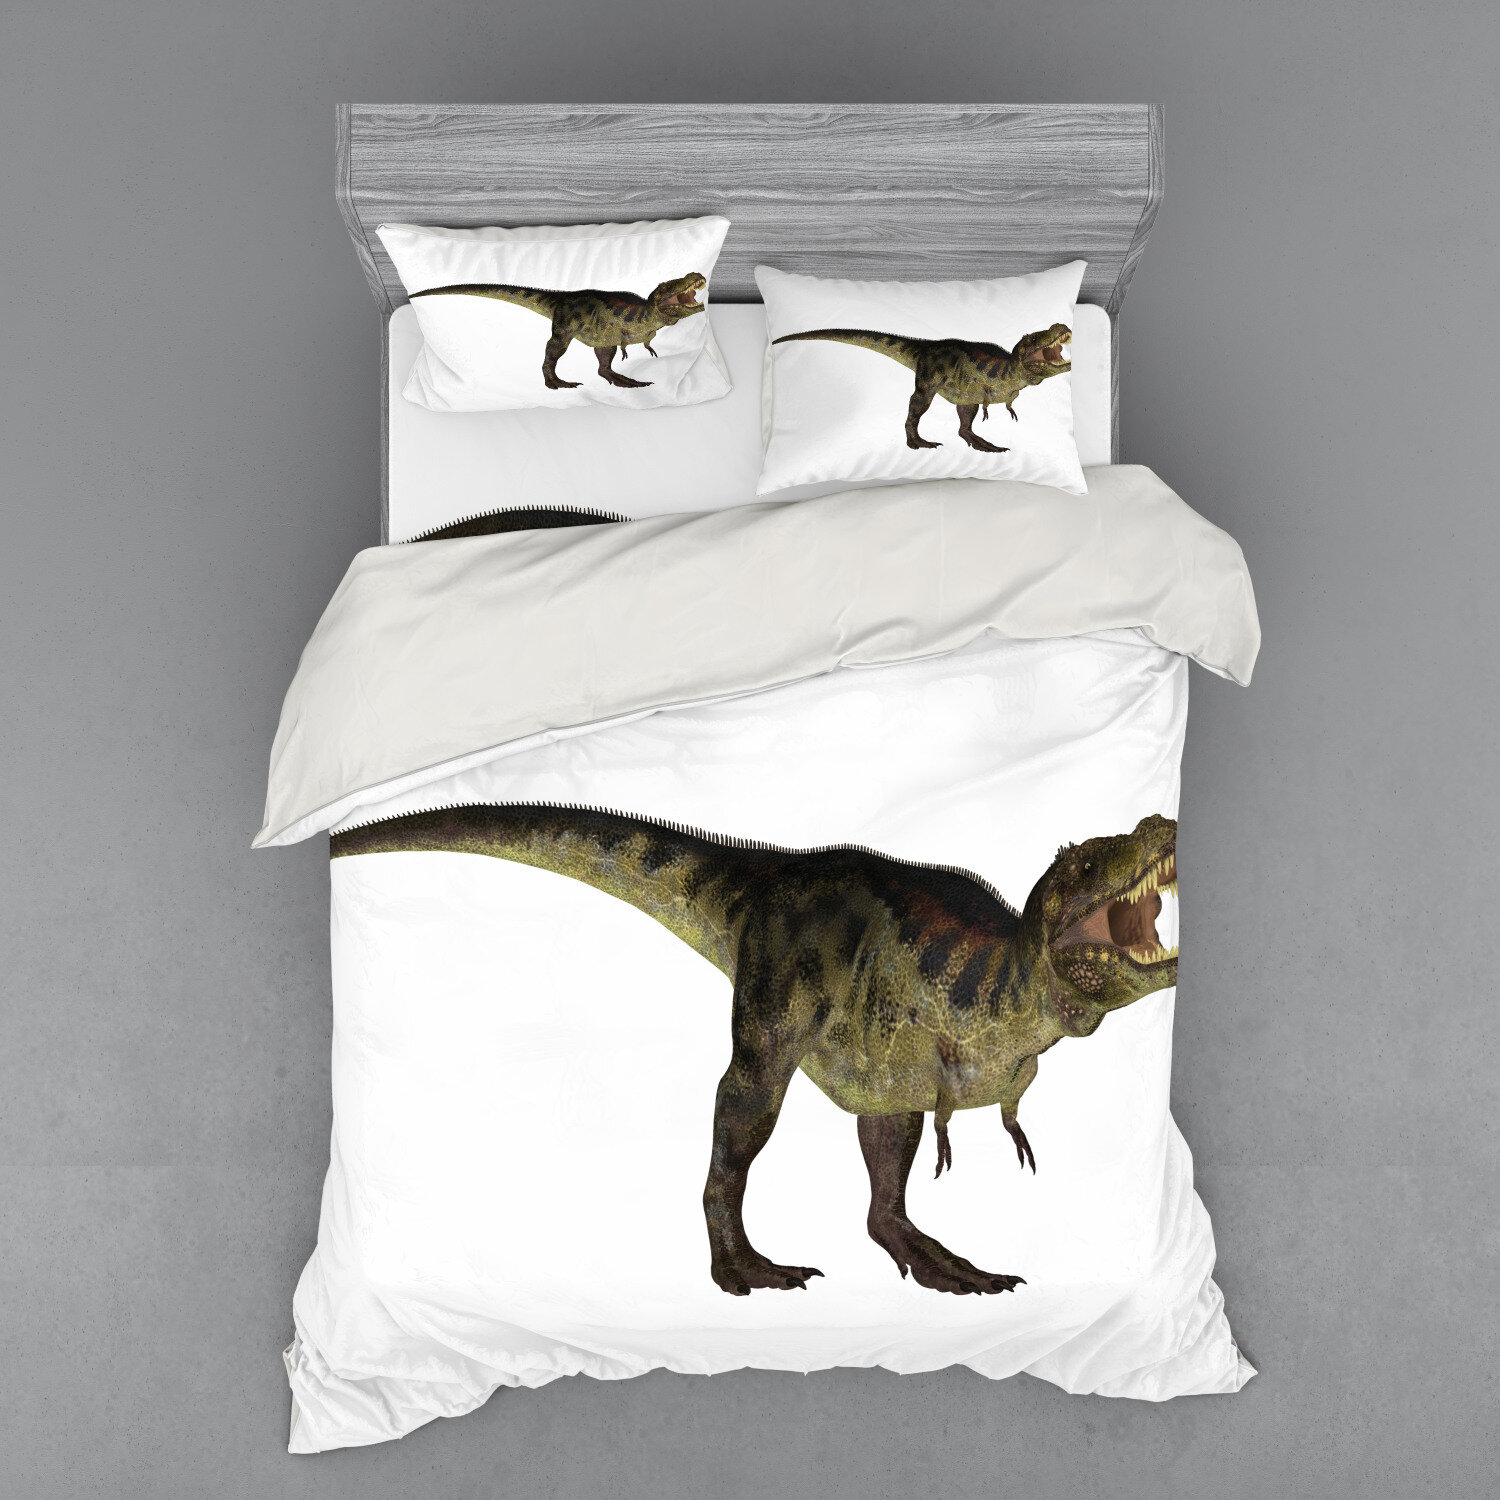 Dinosaurs Lampshades Ideal To Match Dinosaurs Duvets & Dinosaurs Wall Decals 